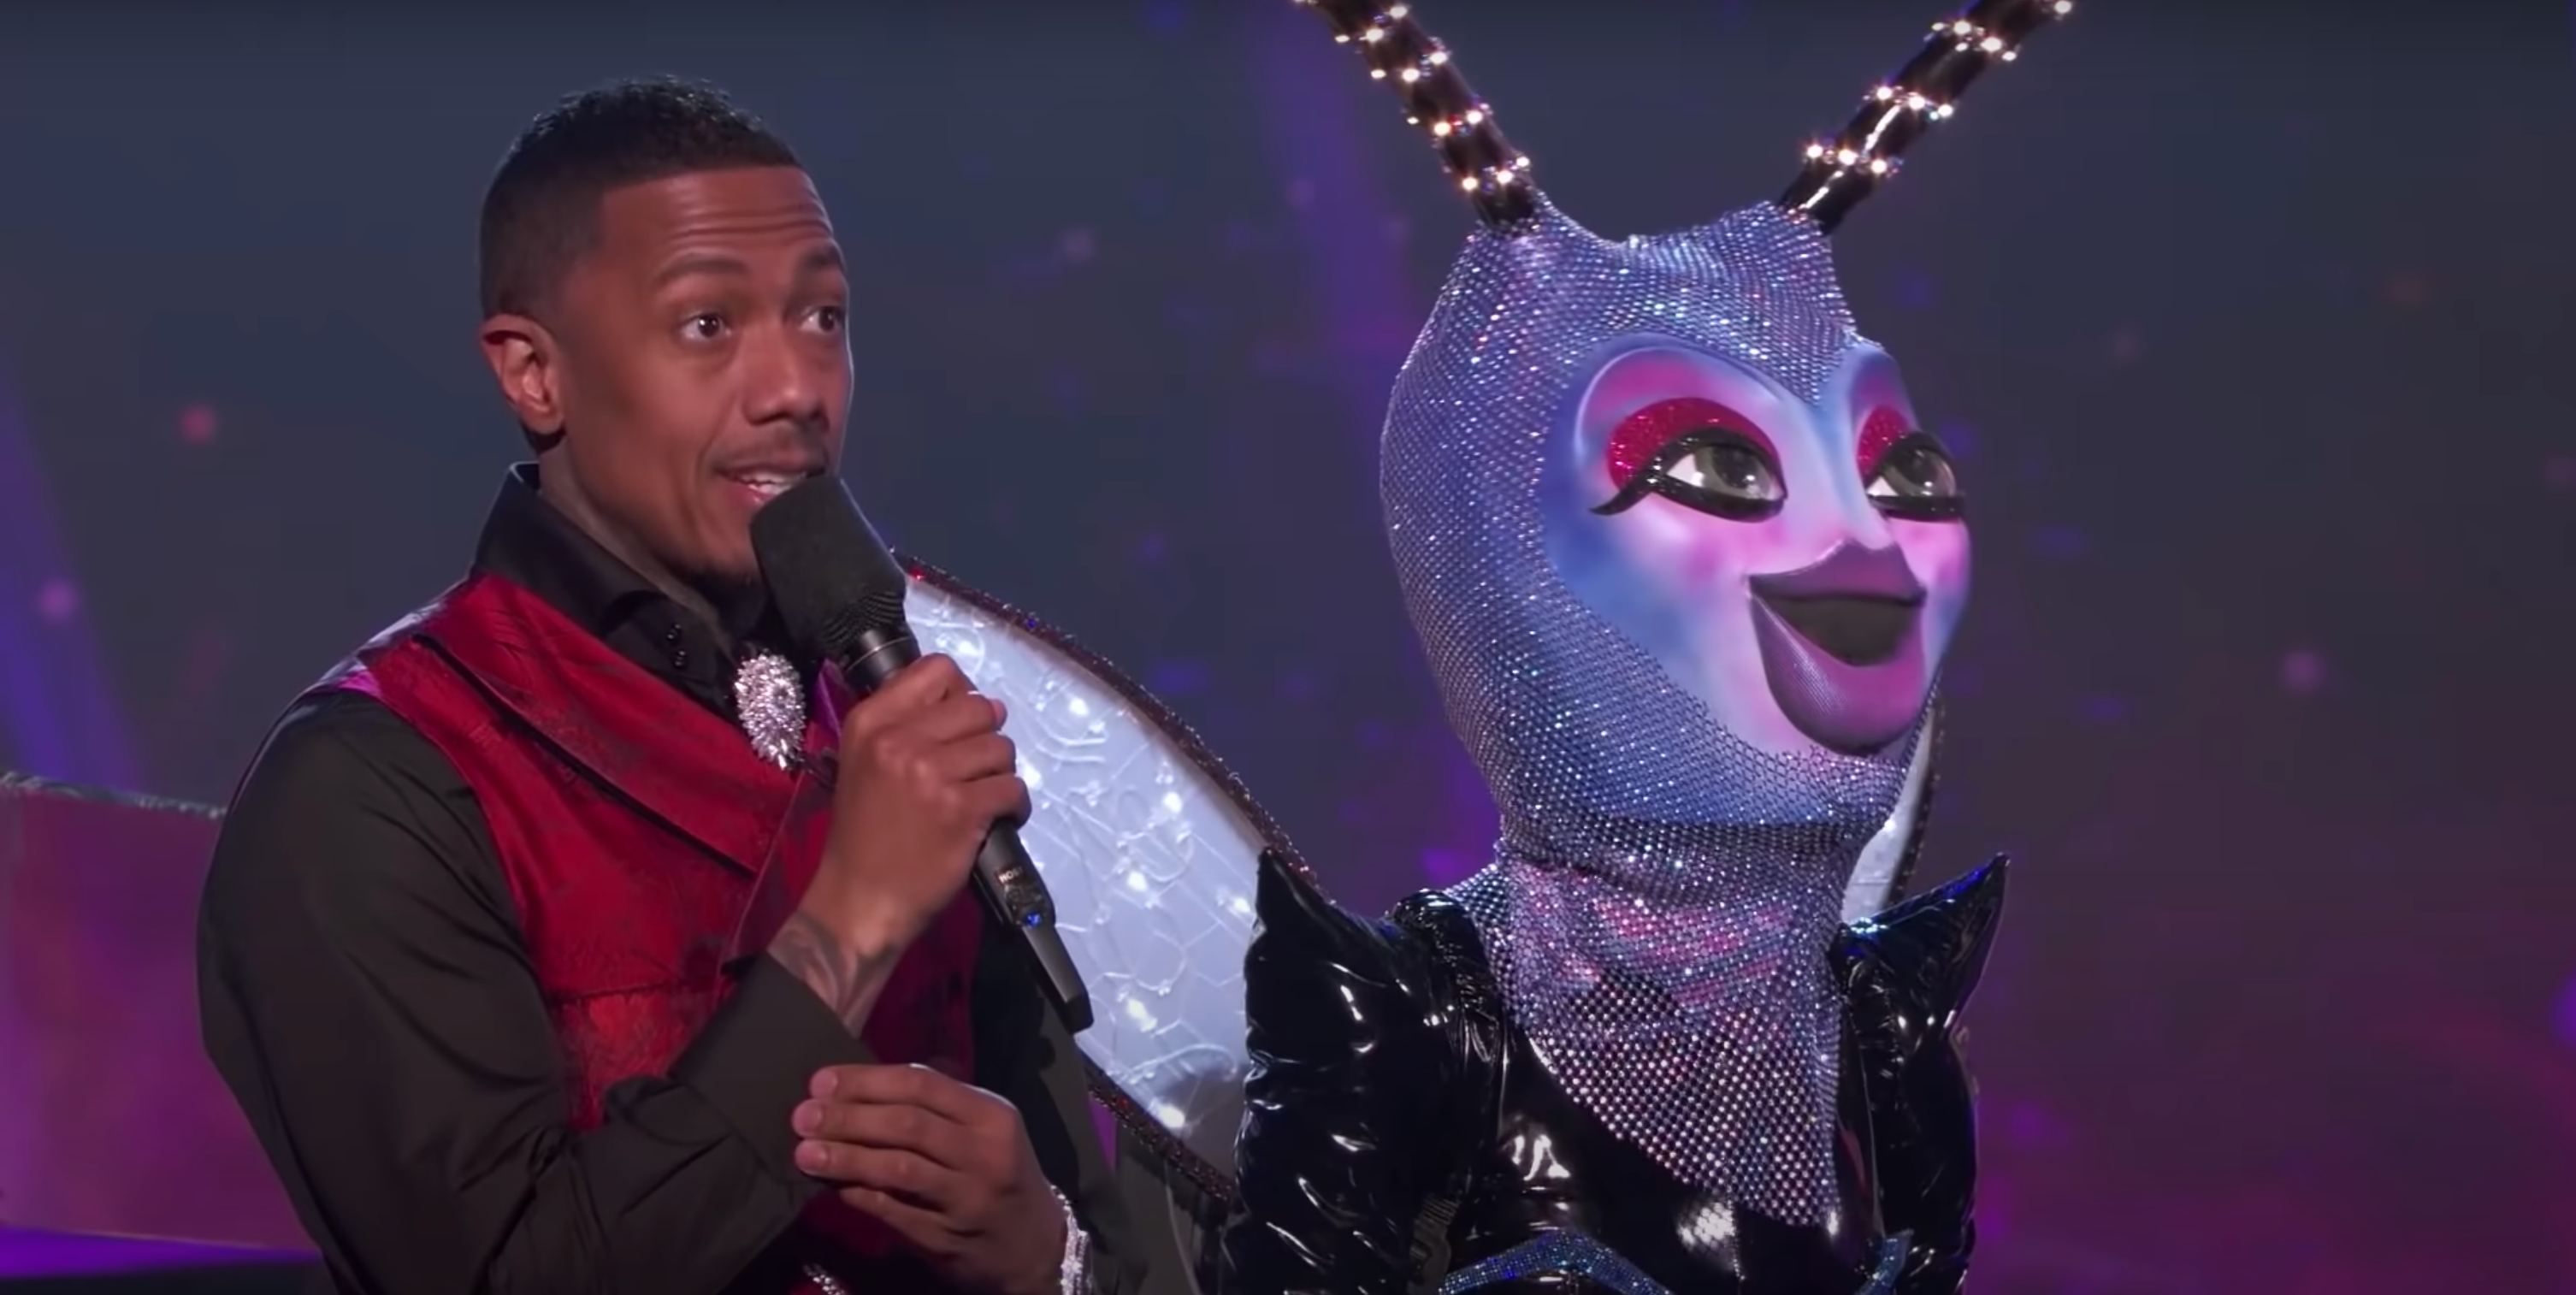 Firefly on The Masked Singer